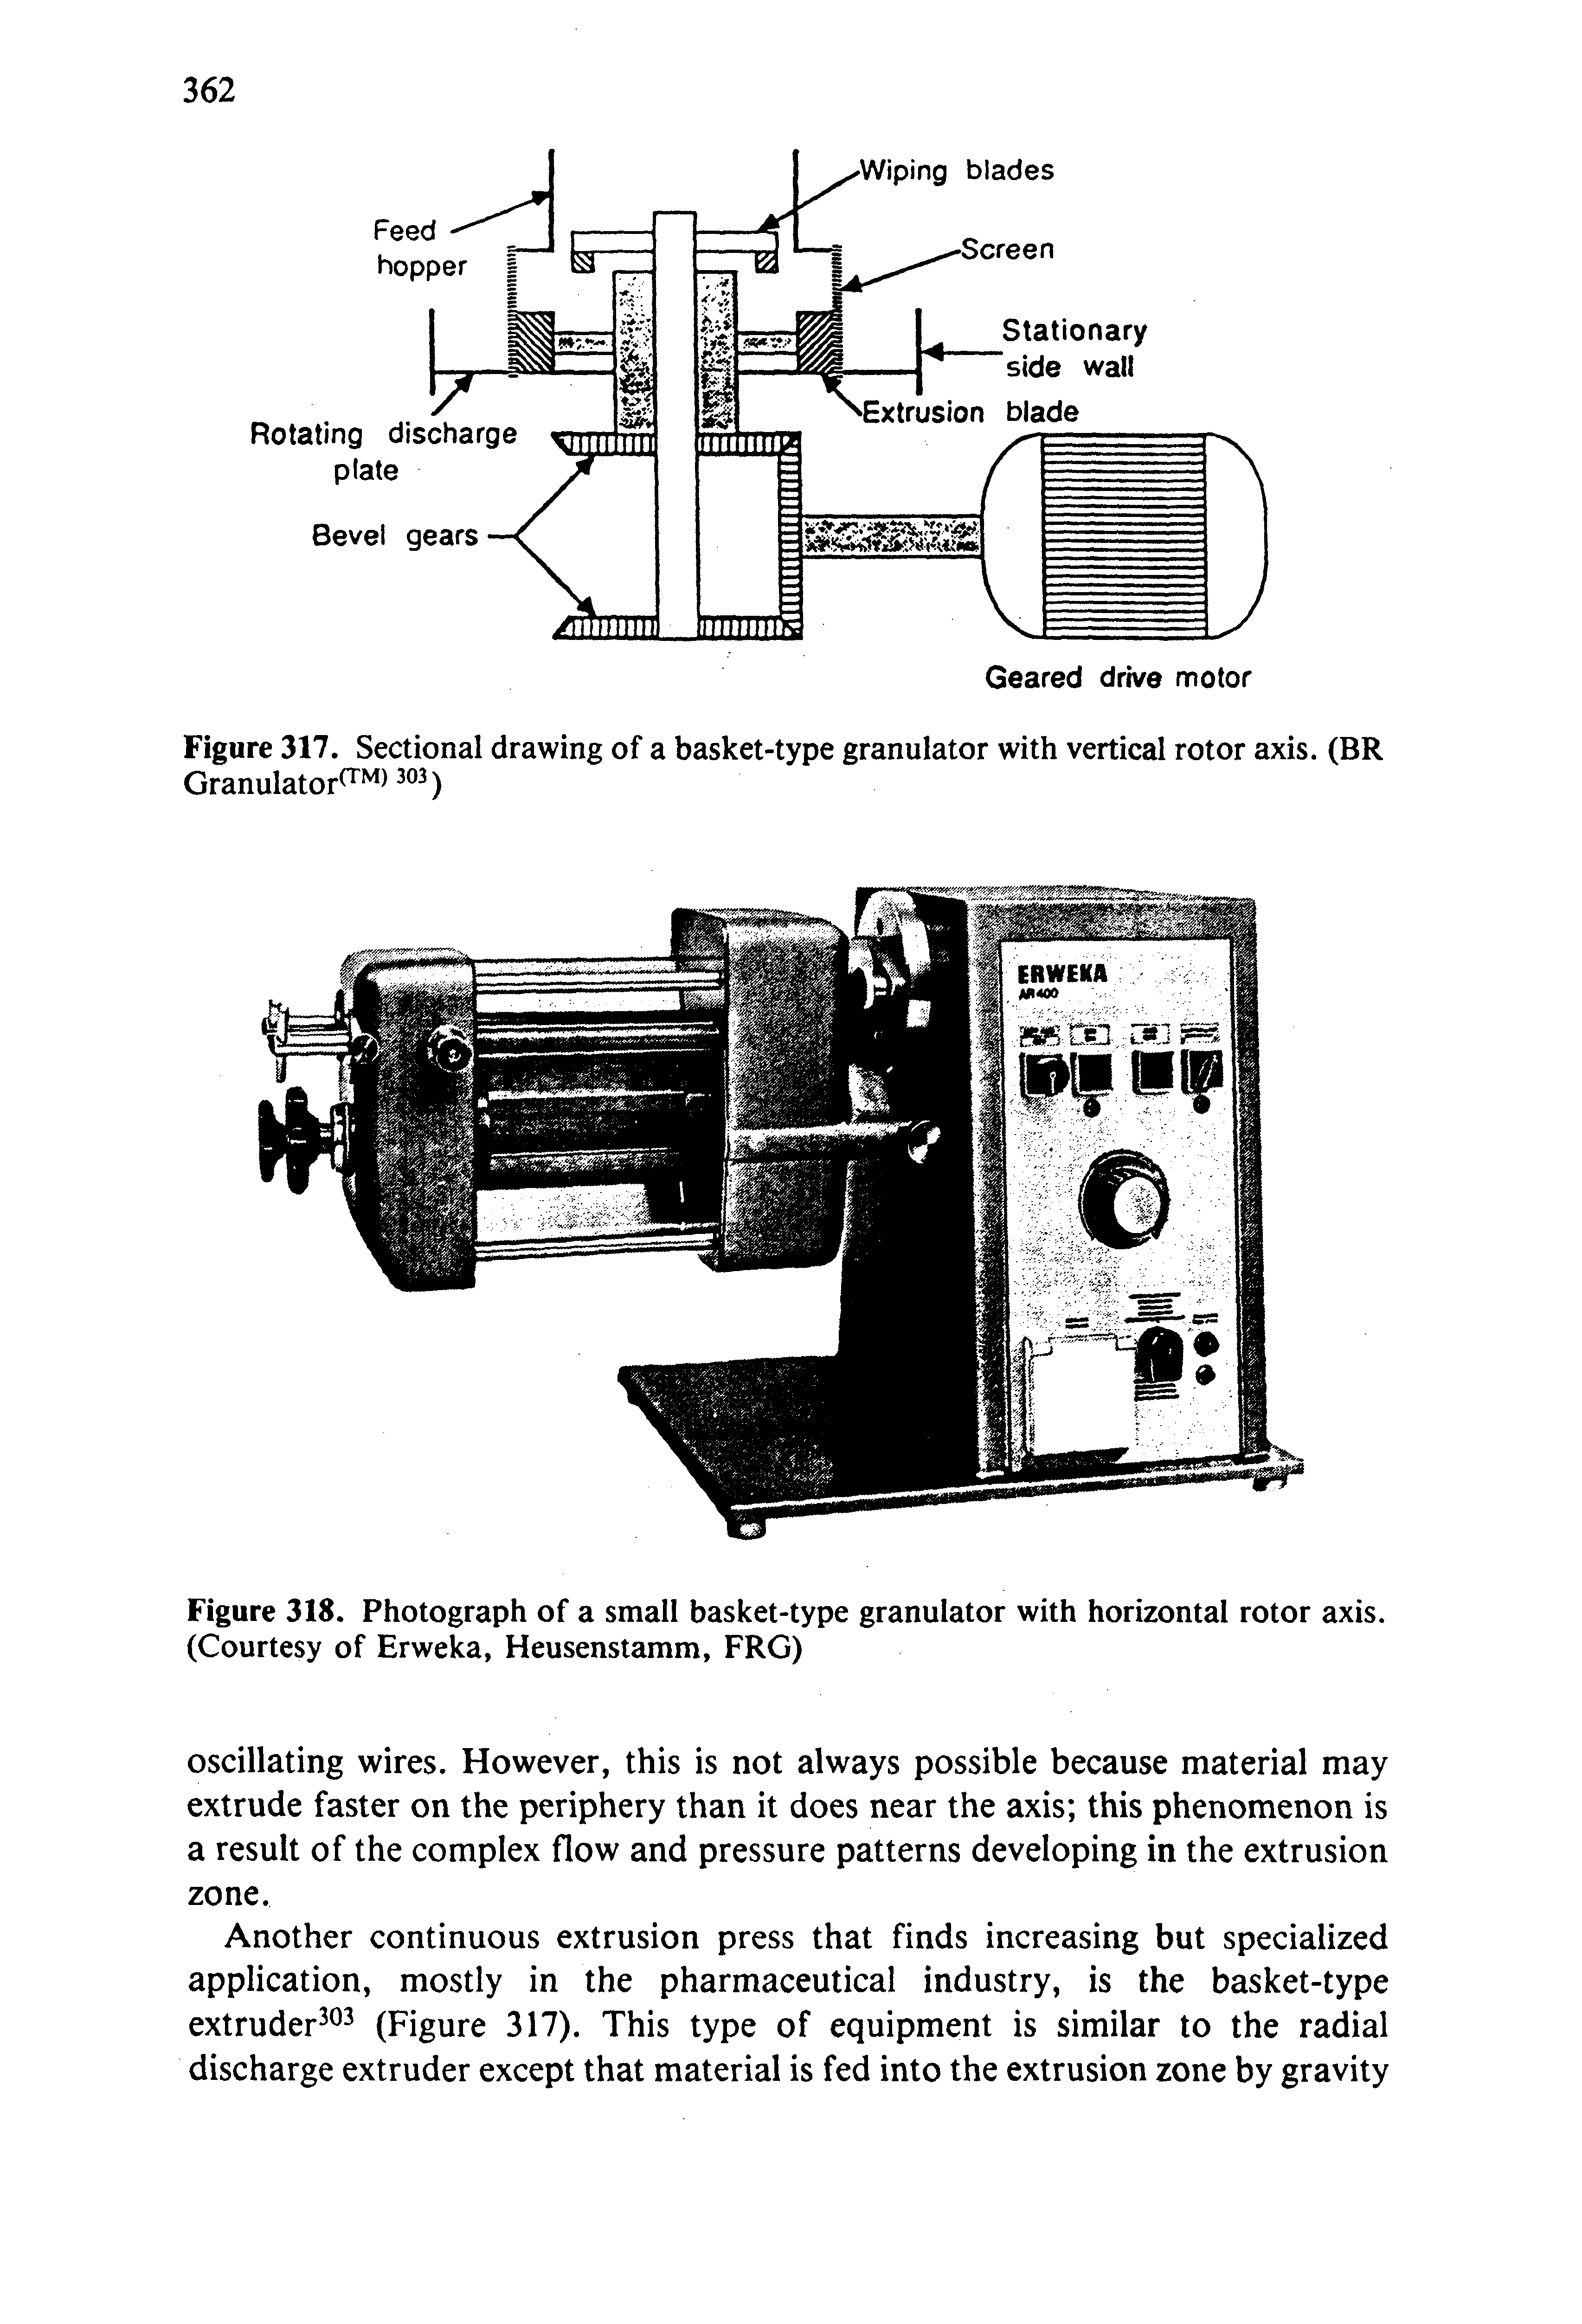 Figure 317. Sectional drawing of a basket-type granulator with vertical rotor axis. (BR Granulator )...